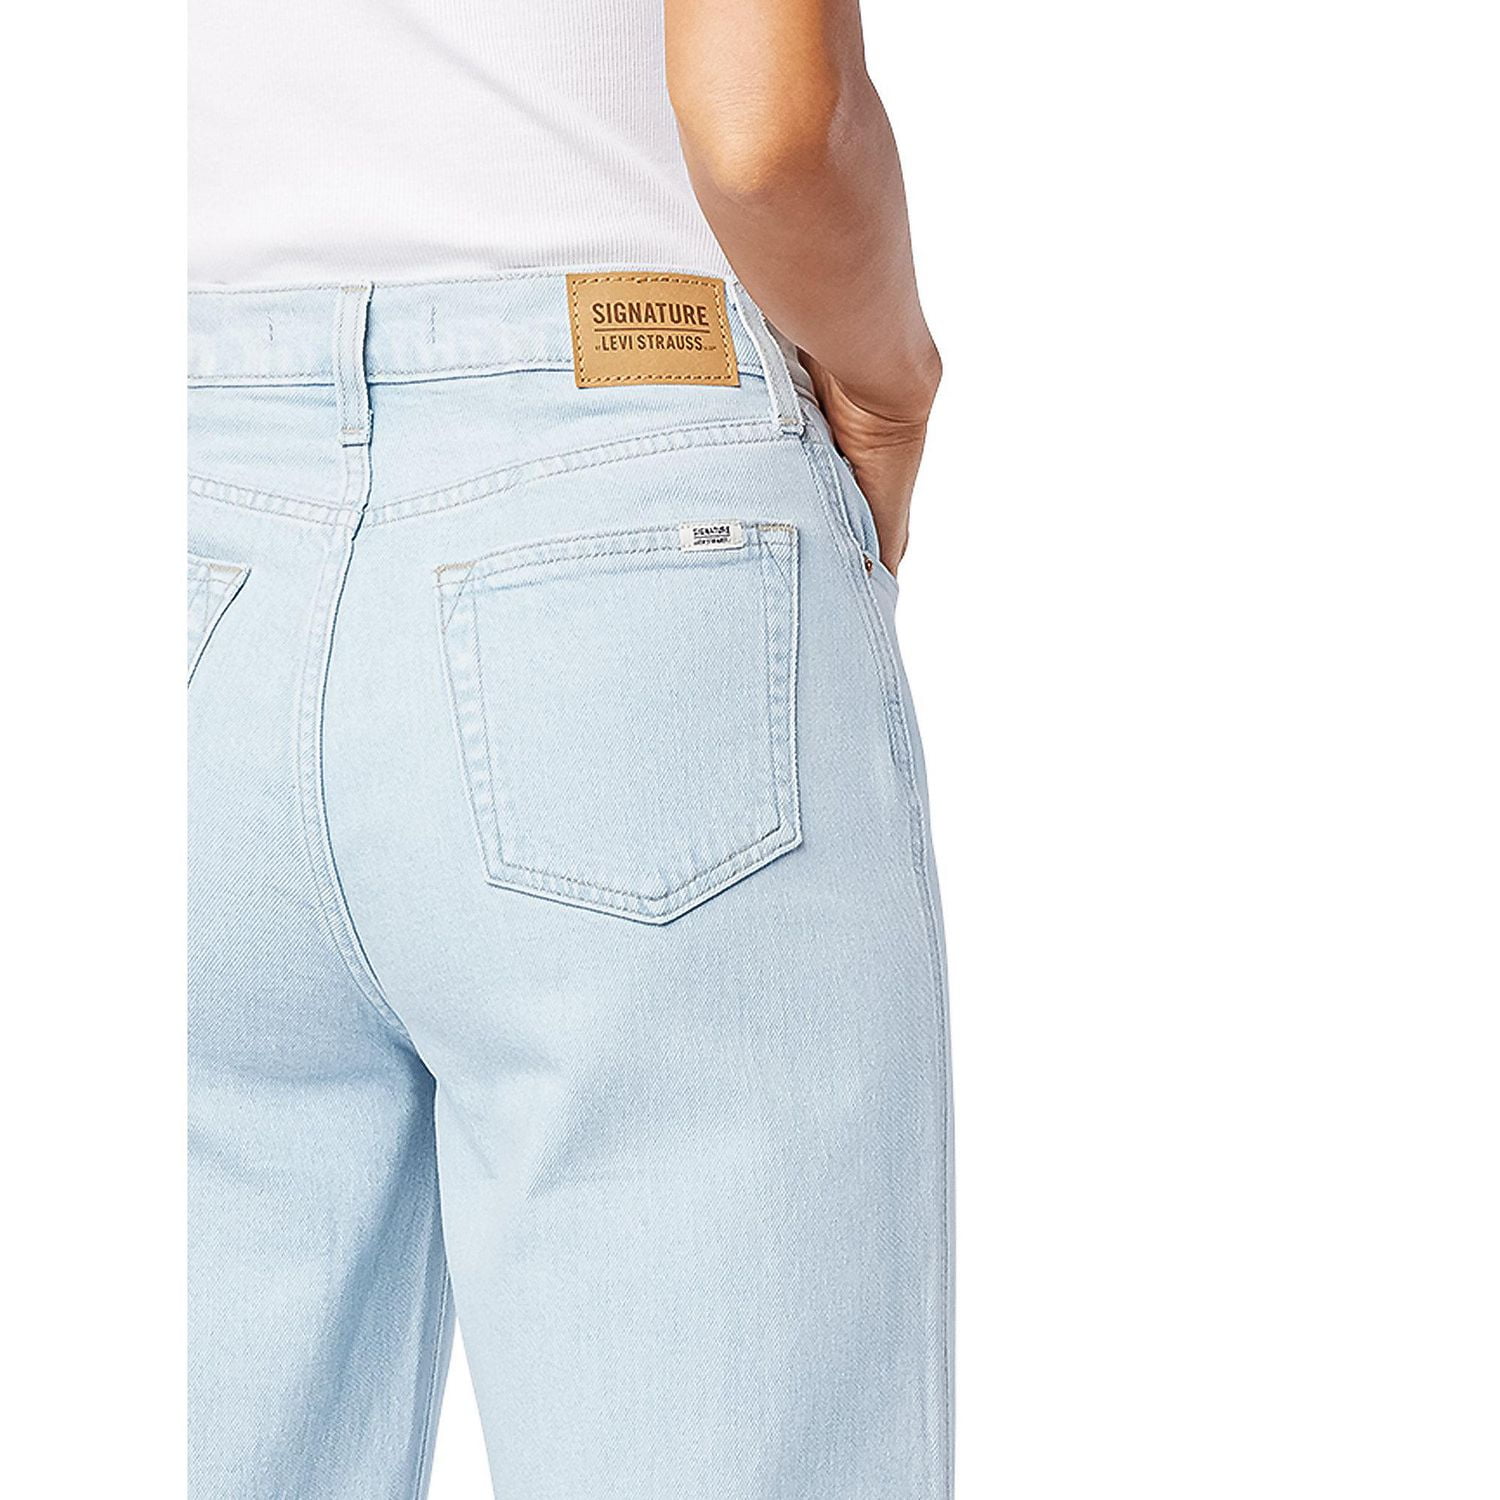 Signature by Levi Strauss & Co. Women's High Rise Skinny Jeans, Available  sizes: 2 – 18 